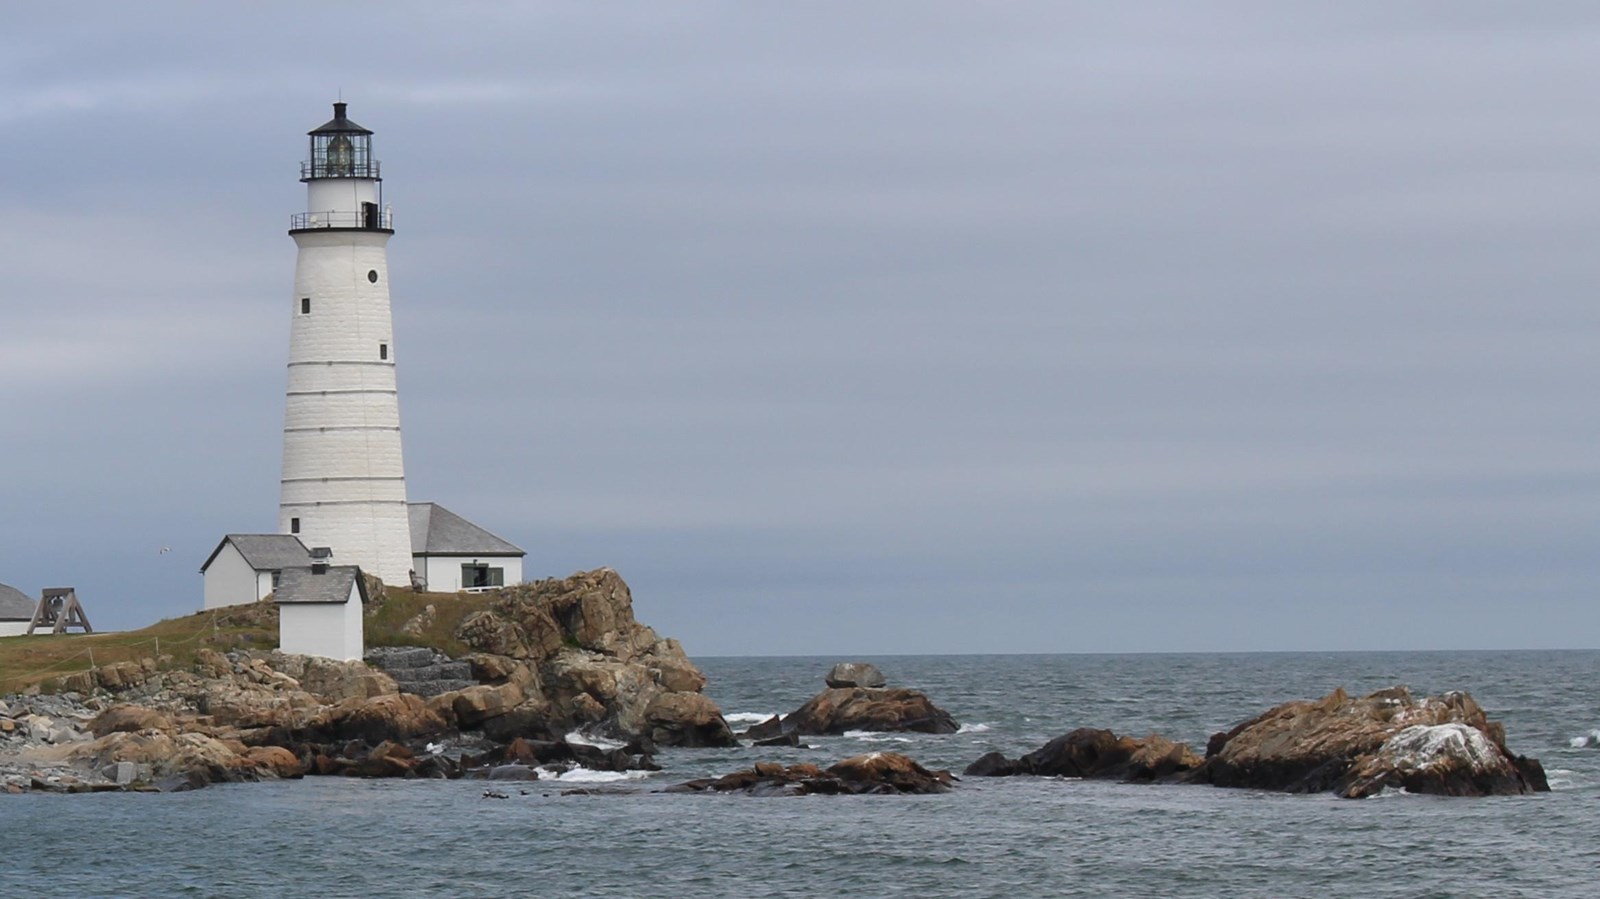 A tall white lighthouse with smaller white buildings at its foot along a rocky coastline.